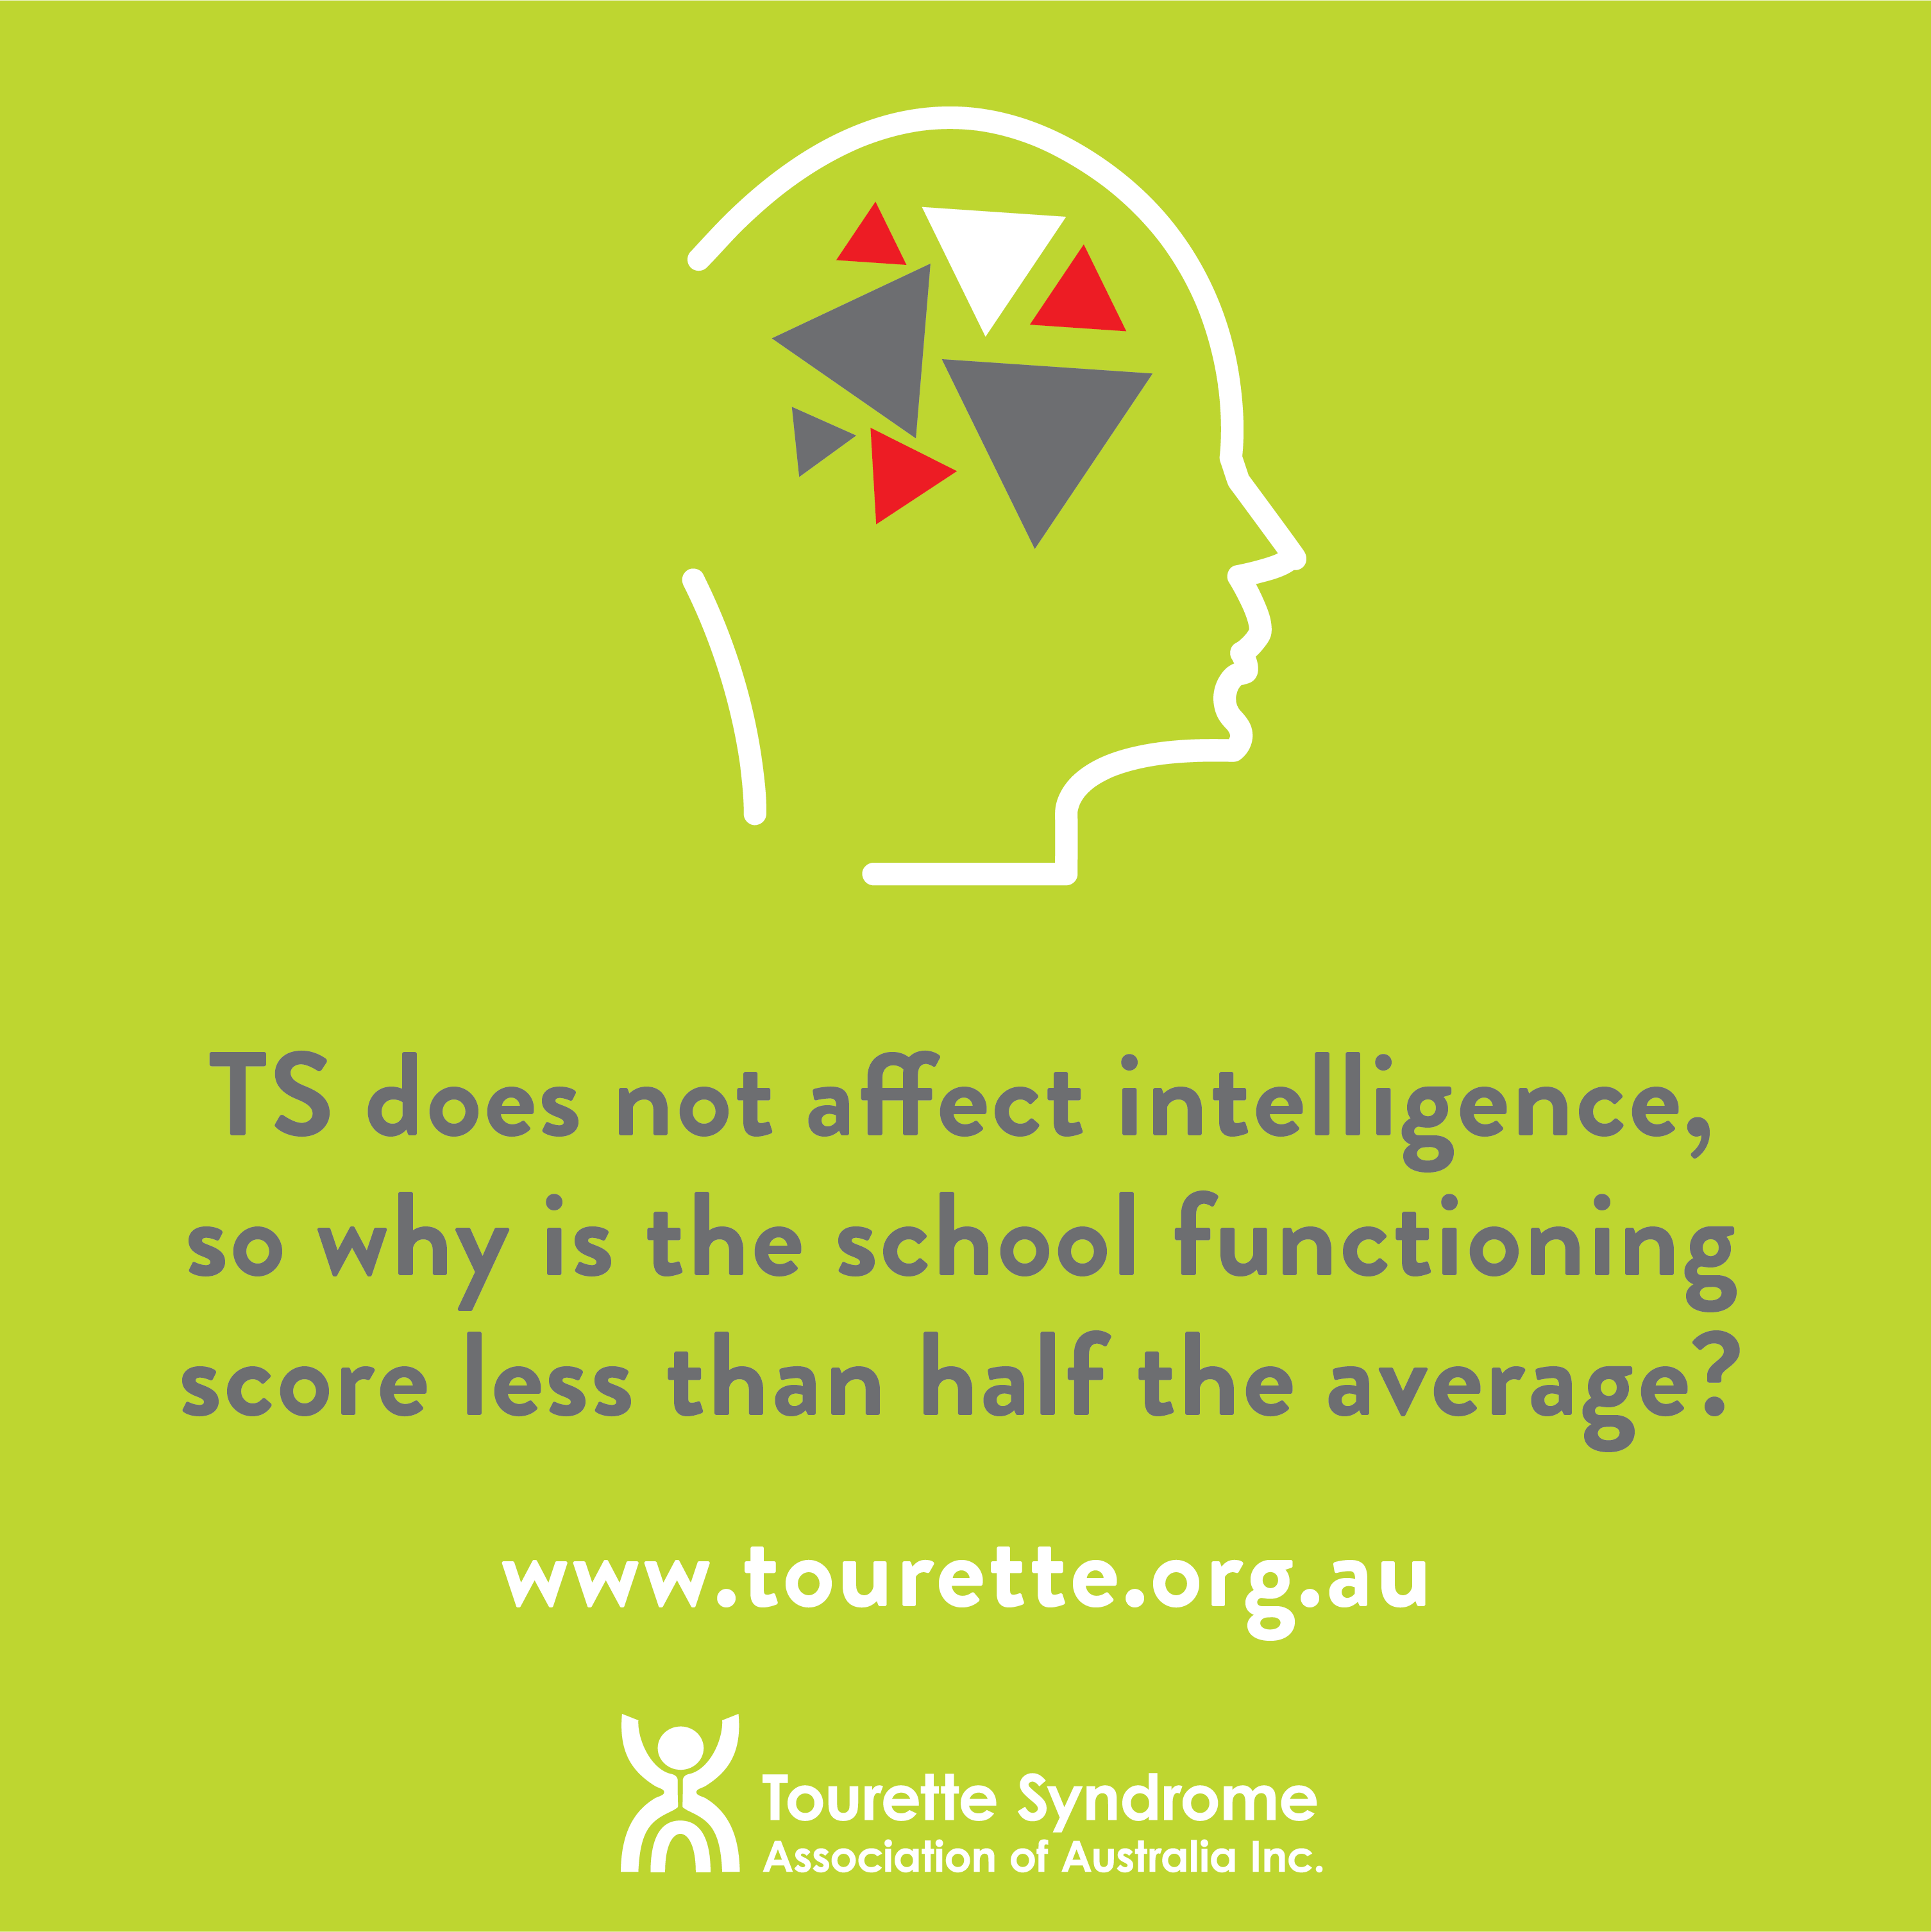 TS does not affect intelligence, so why is the school functioning score less than half the average?